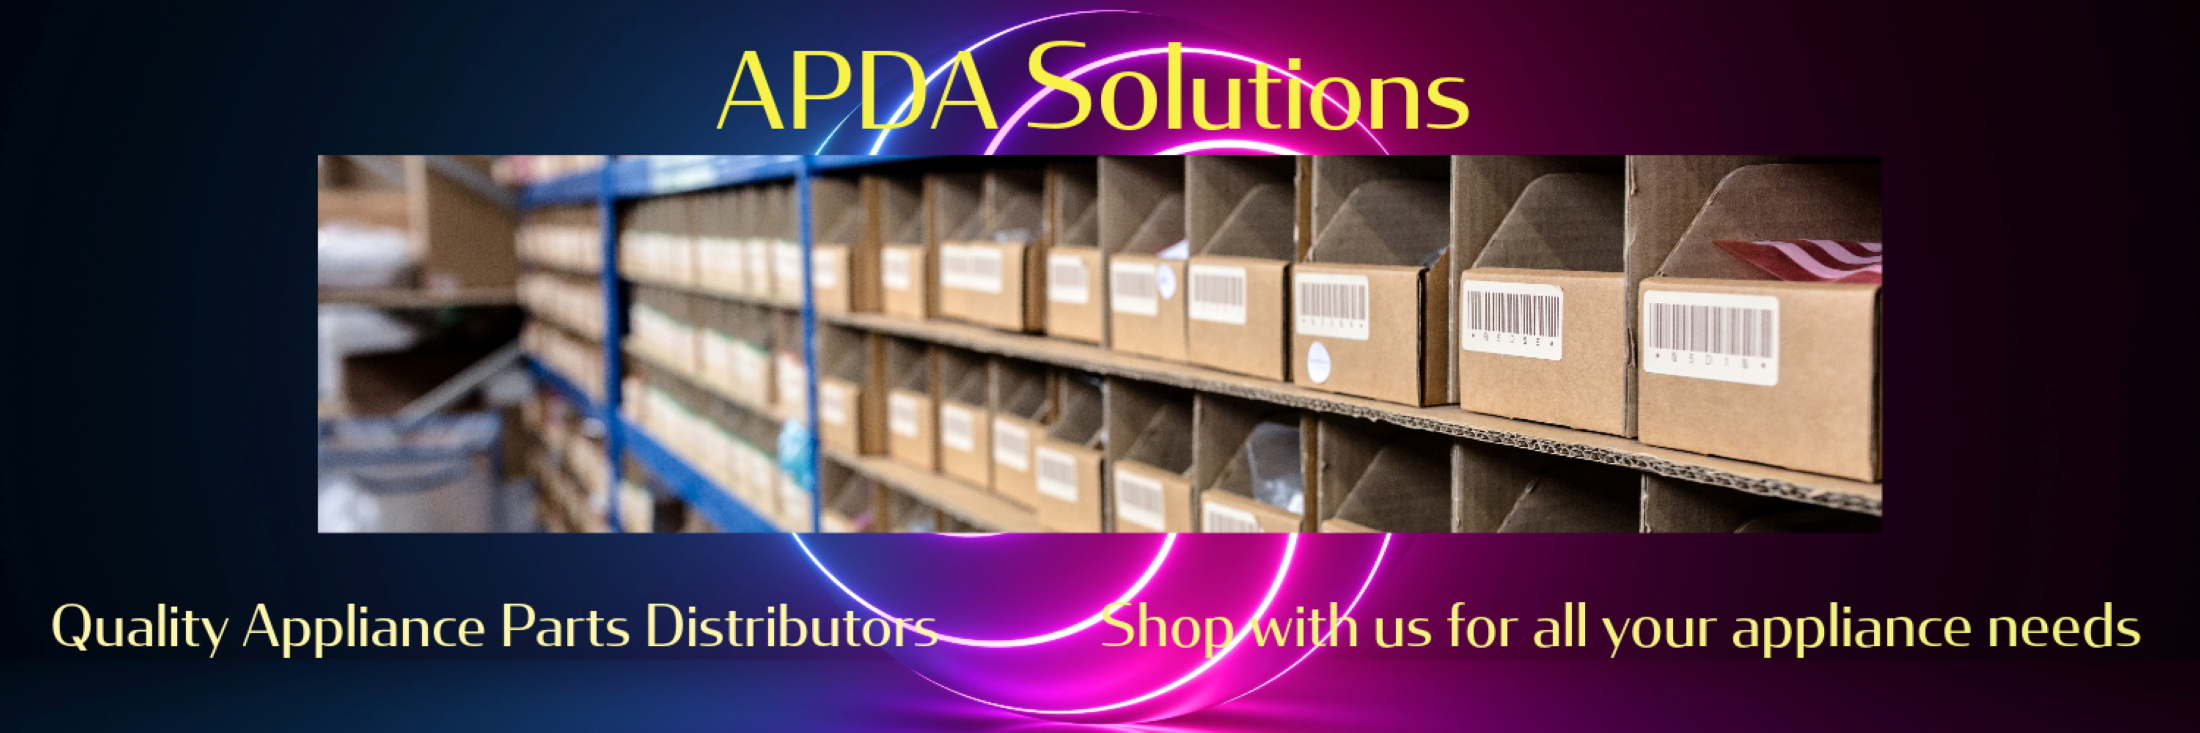 https://apdamerica.com/find-appliance-parts-and-accessories/